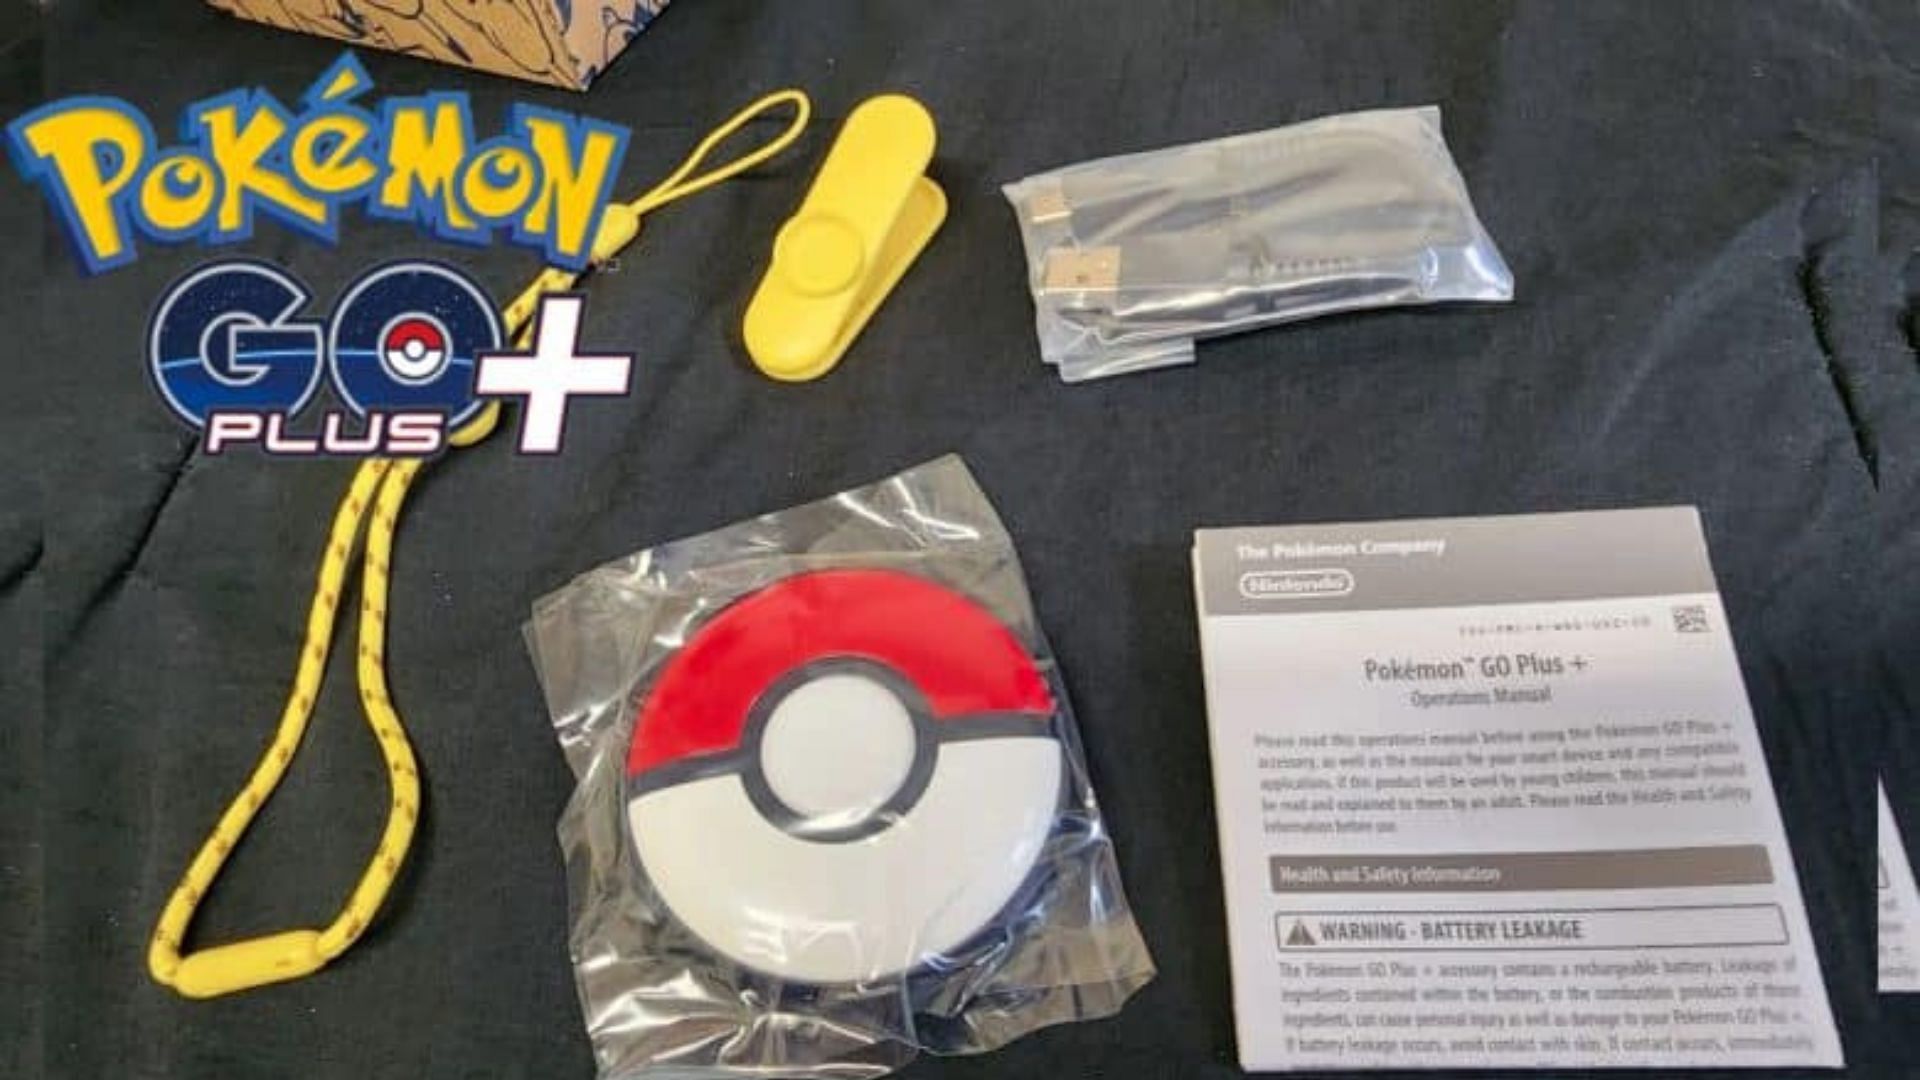 Unboxing the device (Image via Niantic)